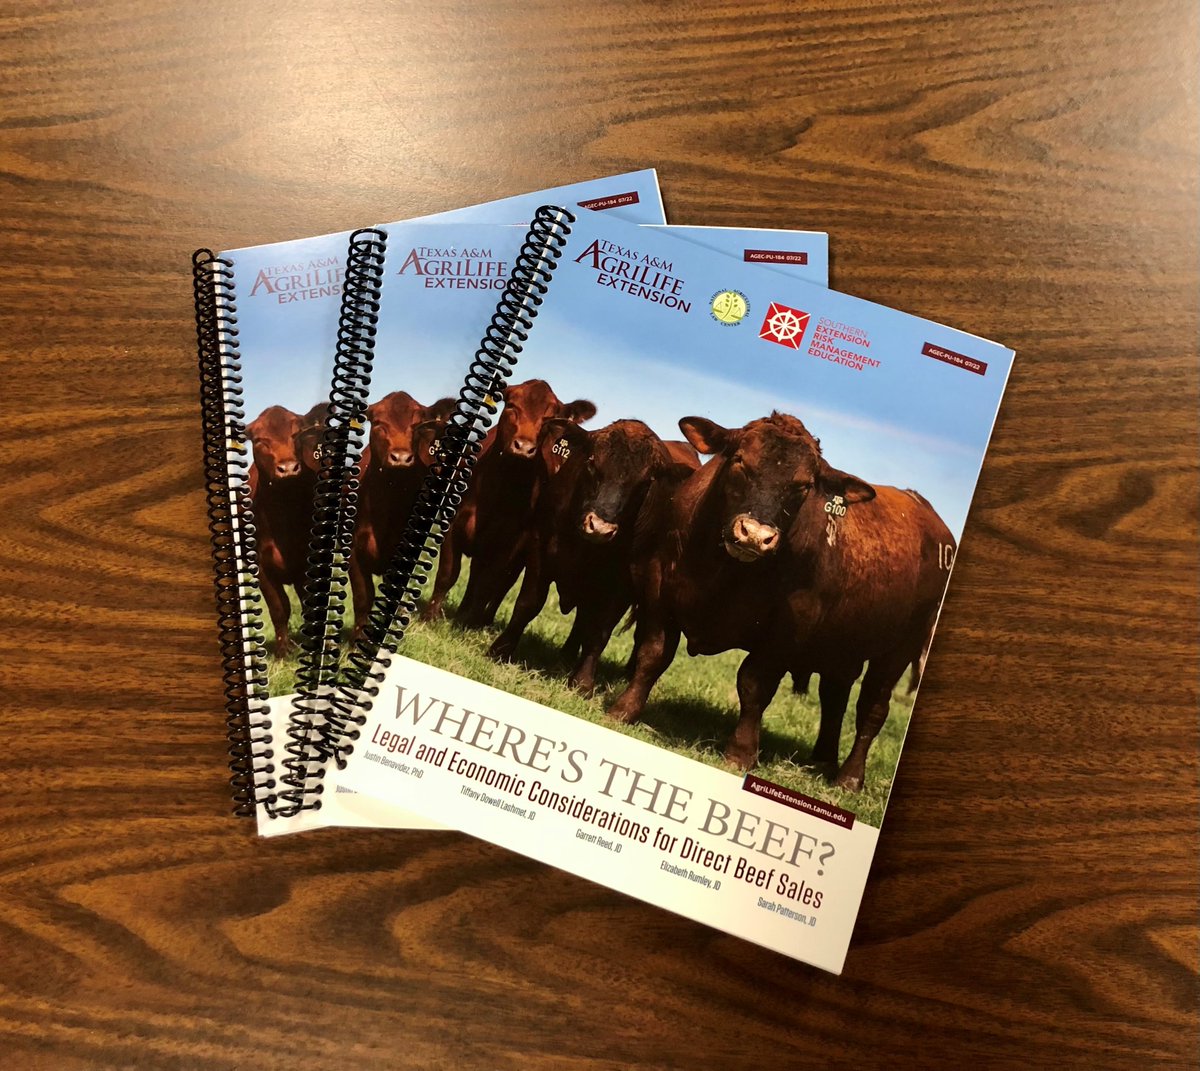 Are you interested in selling beef directly to the consumer? We've got the resource for you! Free PDF: bit.ly/3oyynQf Or, if you learn better with the paper book in your hand, we have hard copies for sale. Call Lacrecia at 806-677-5600 to order yours. #aglaw #beef